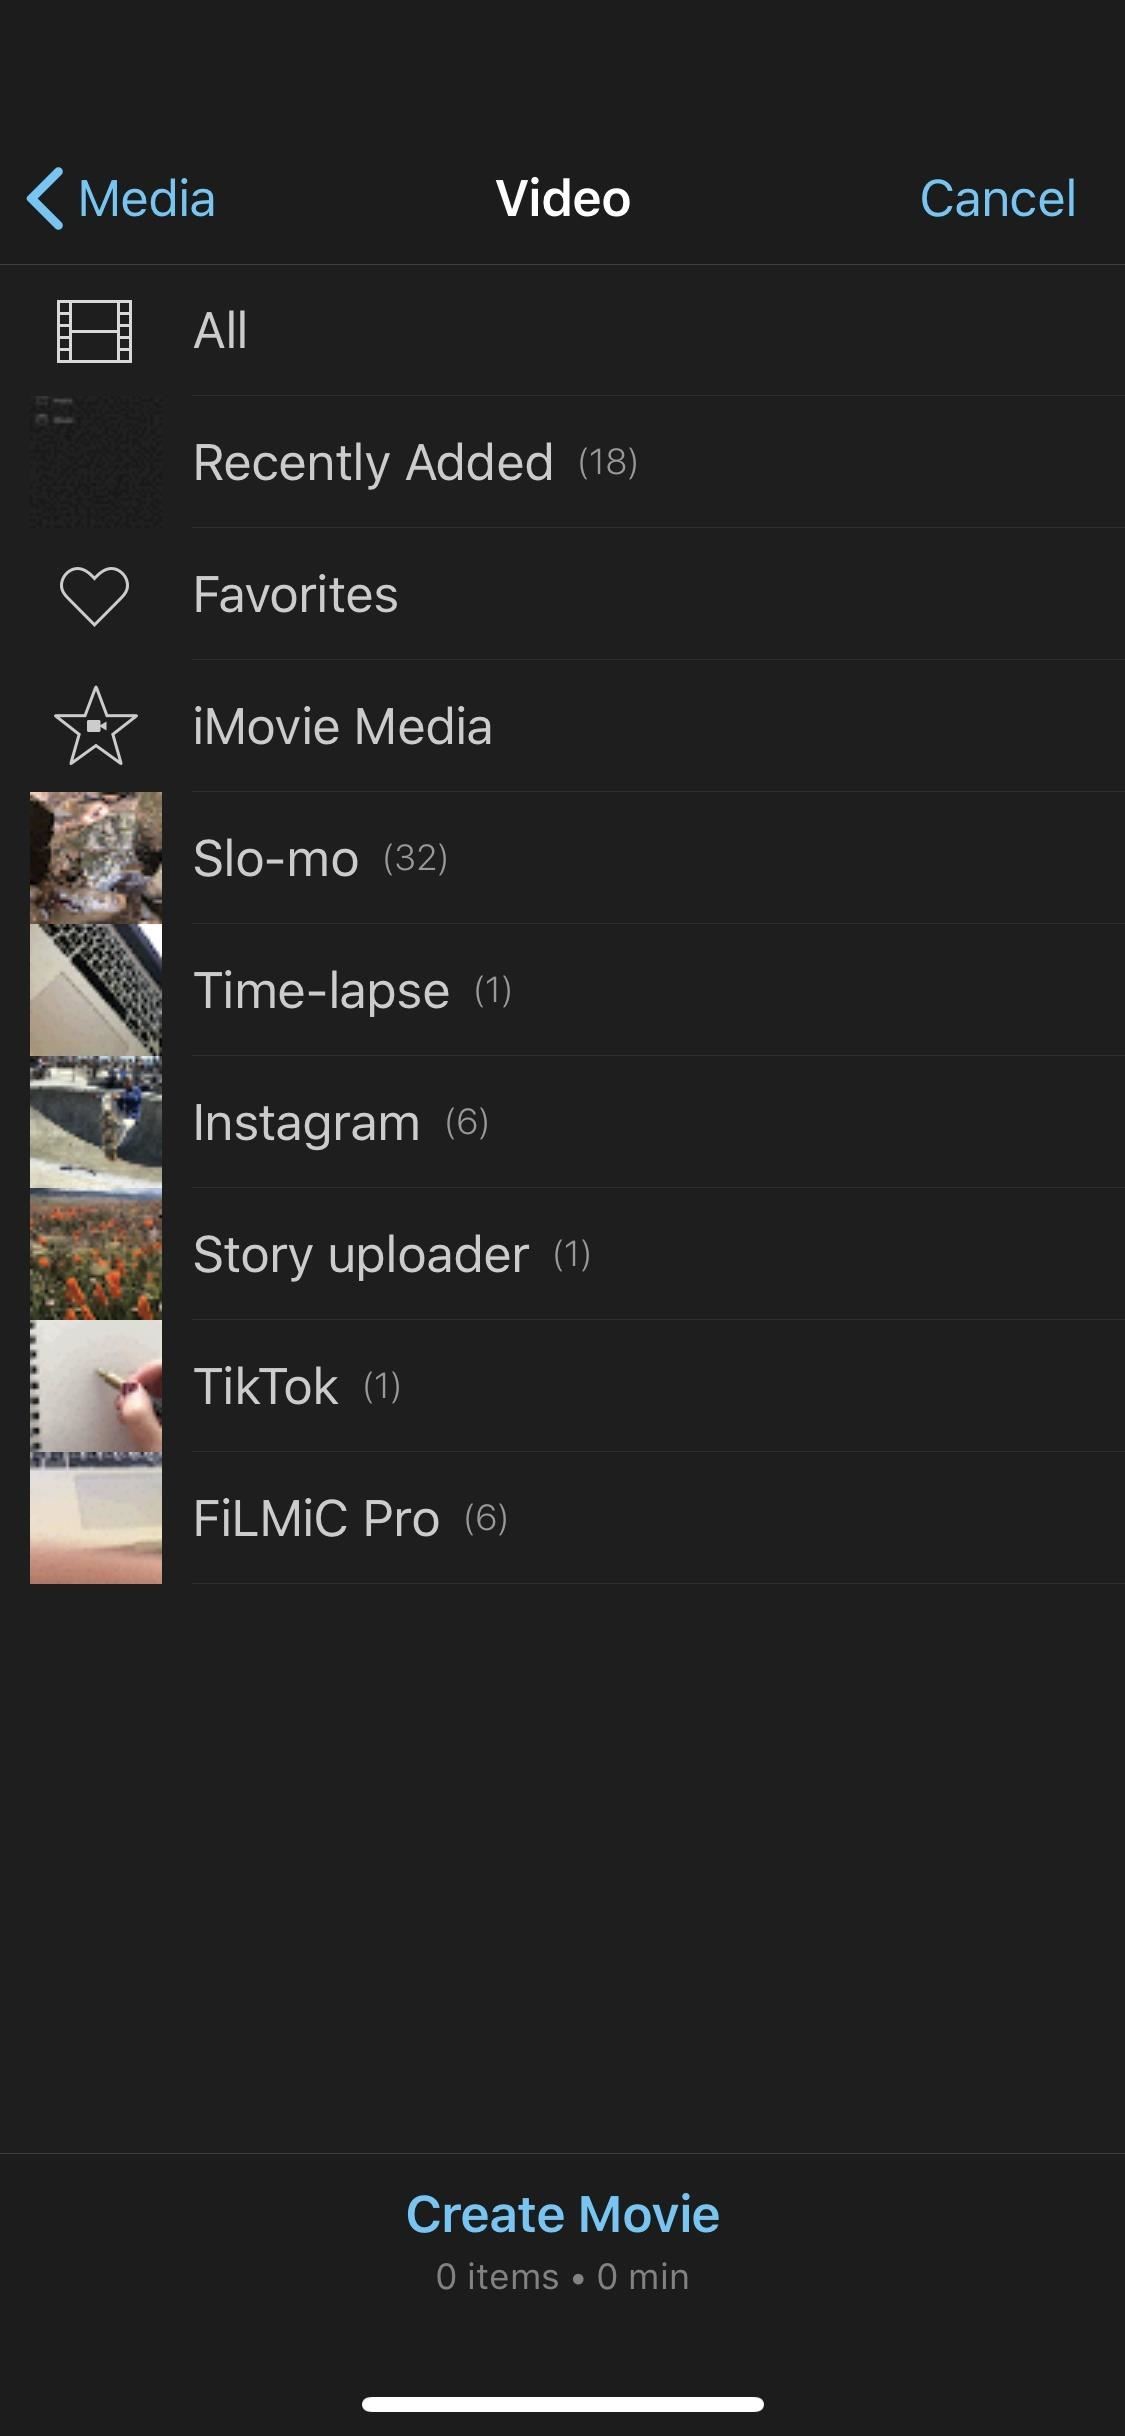 How to Create a New Movie Project in iMovie on Your iPhone